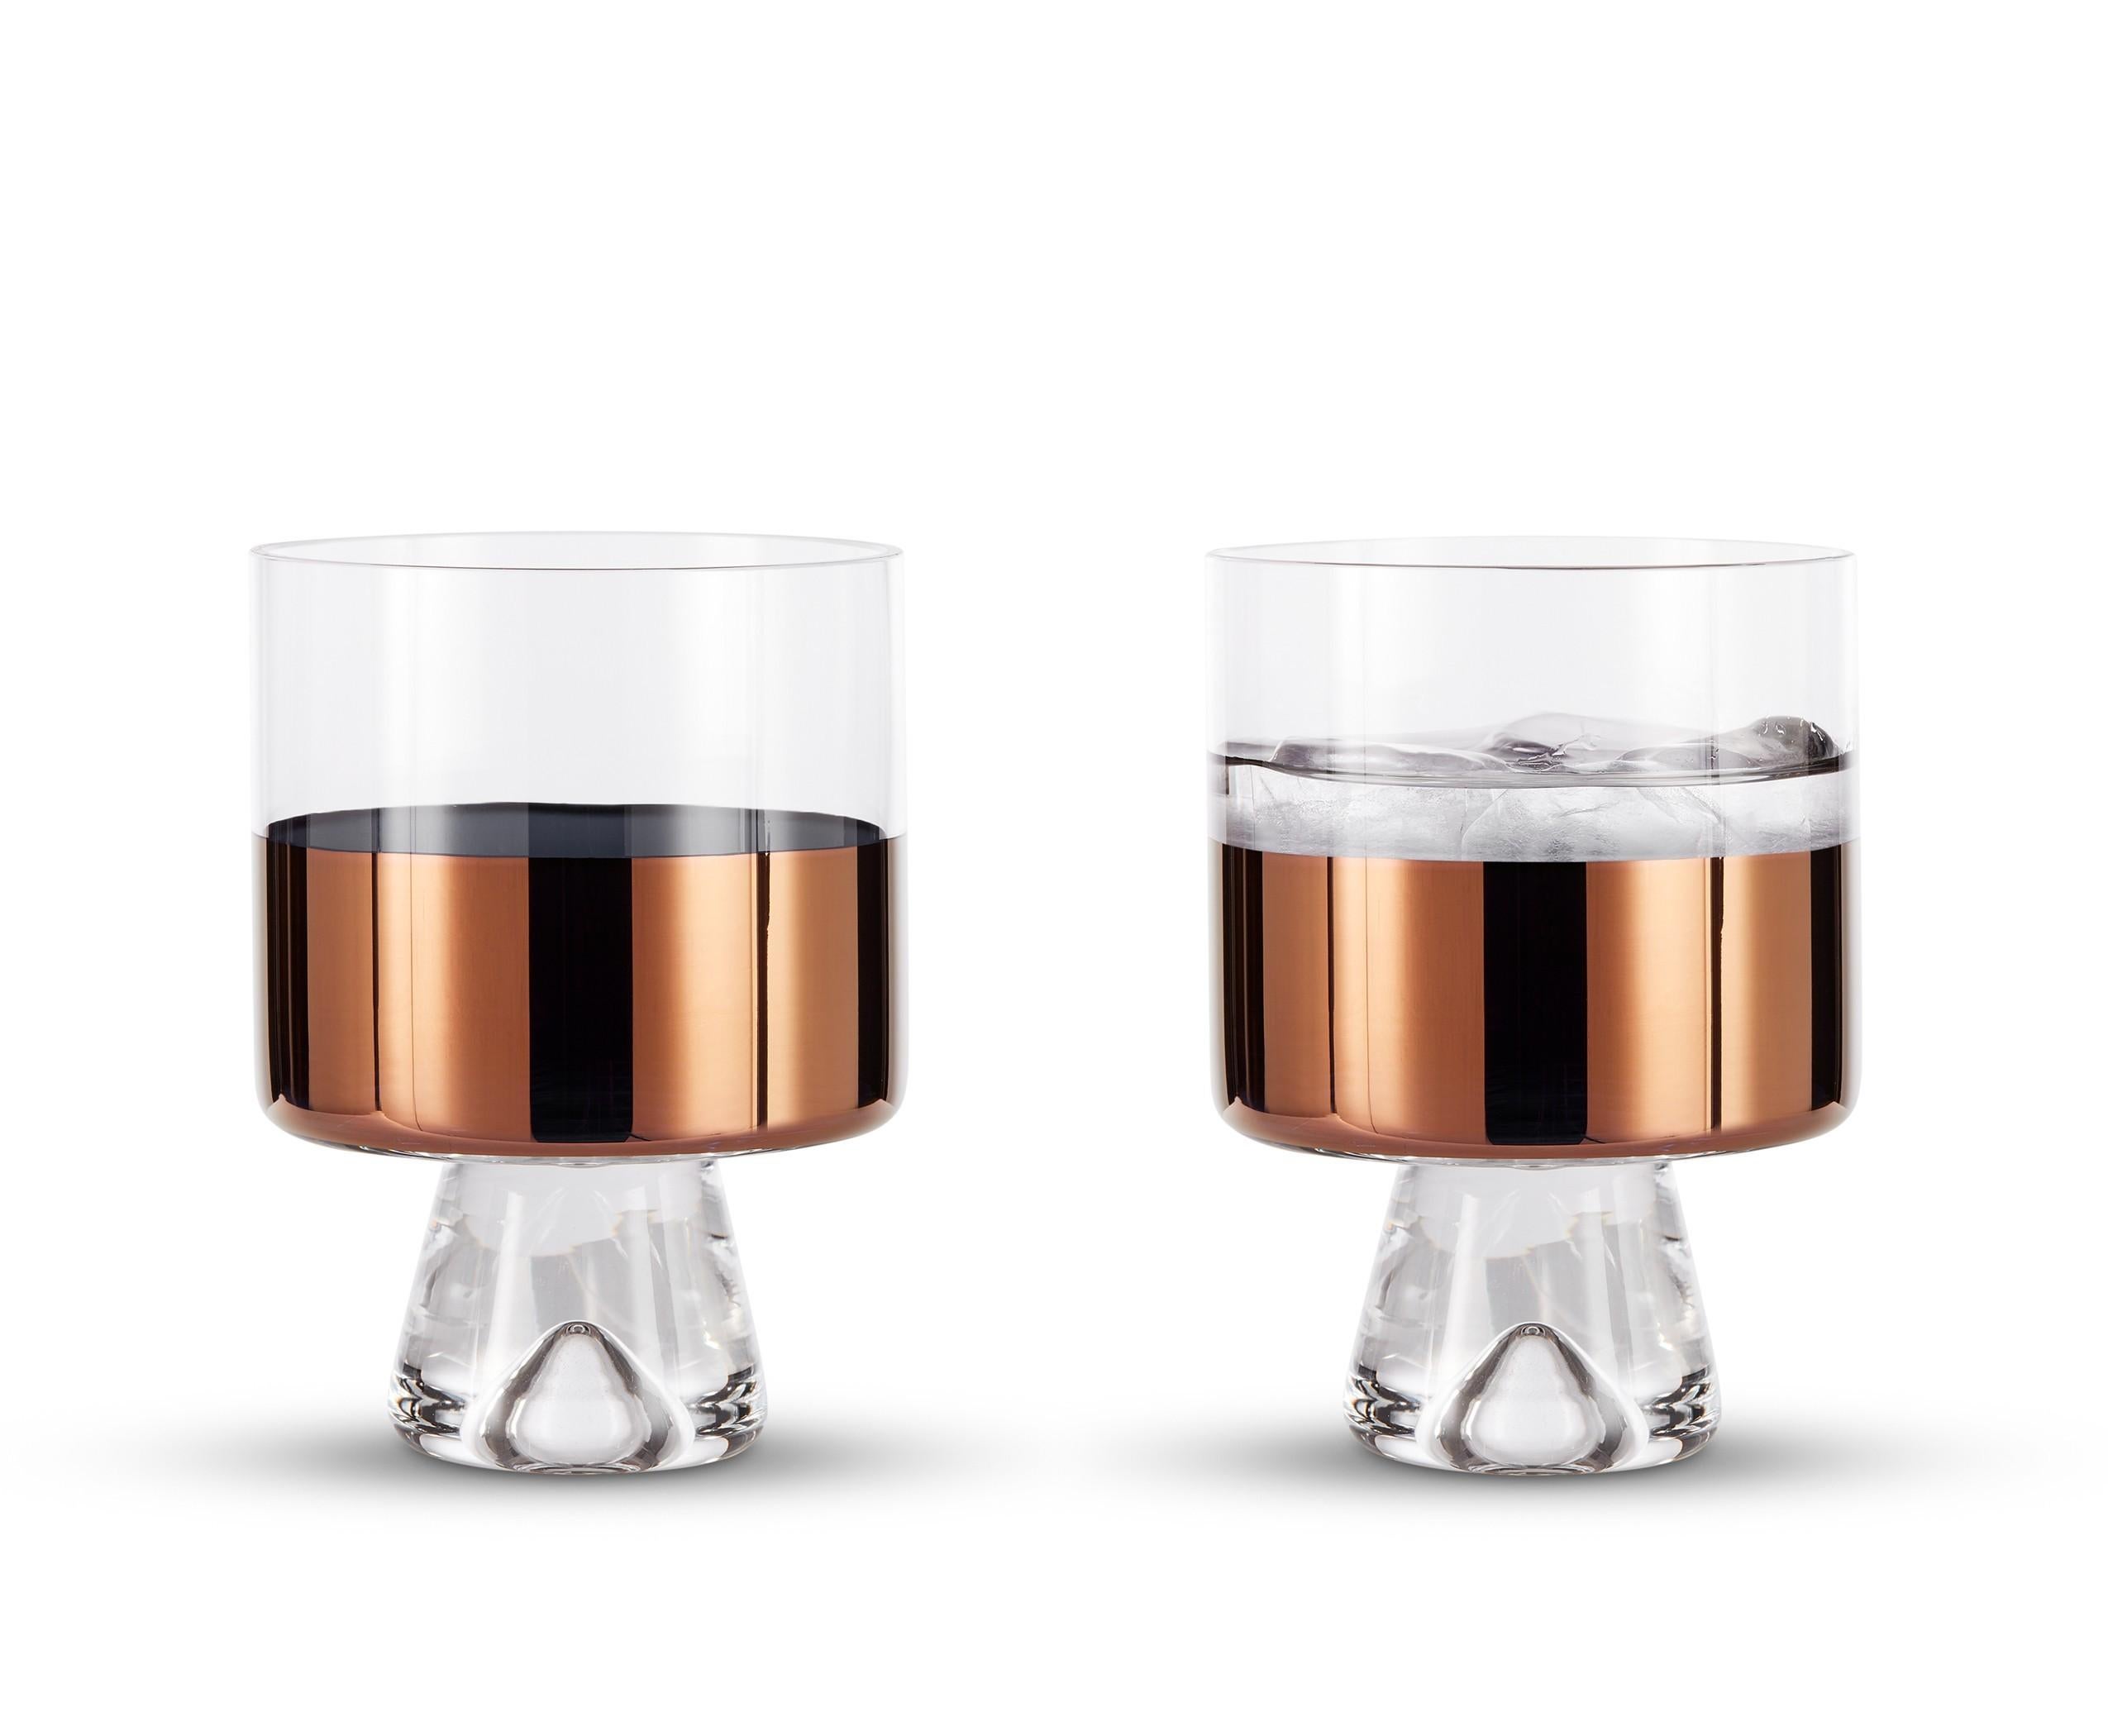 Tank low ball glasses are mouth-blown and ornamented with hand painted copper detailing they go hand in hand with our tank high ball glasses and pair beautifully with items from our Plum range too. Especially made for short drinks, perfect for